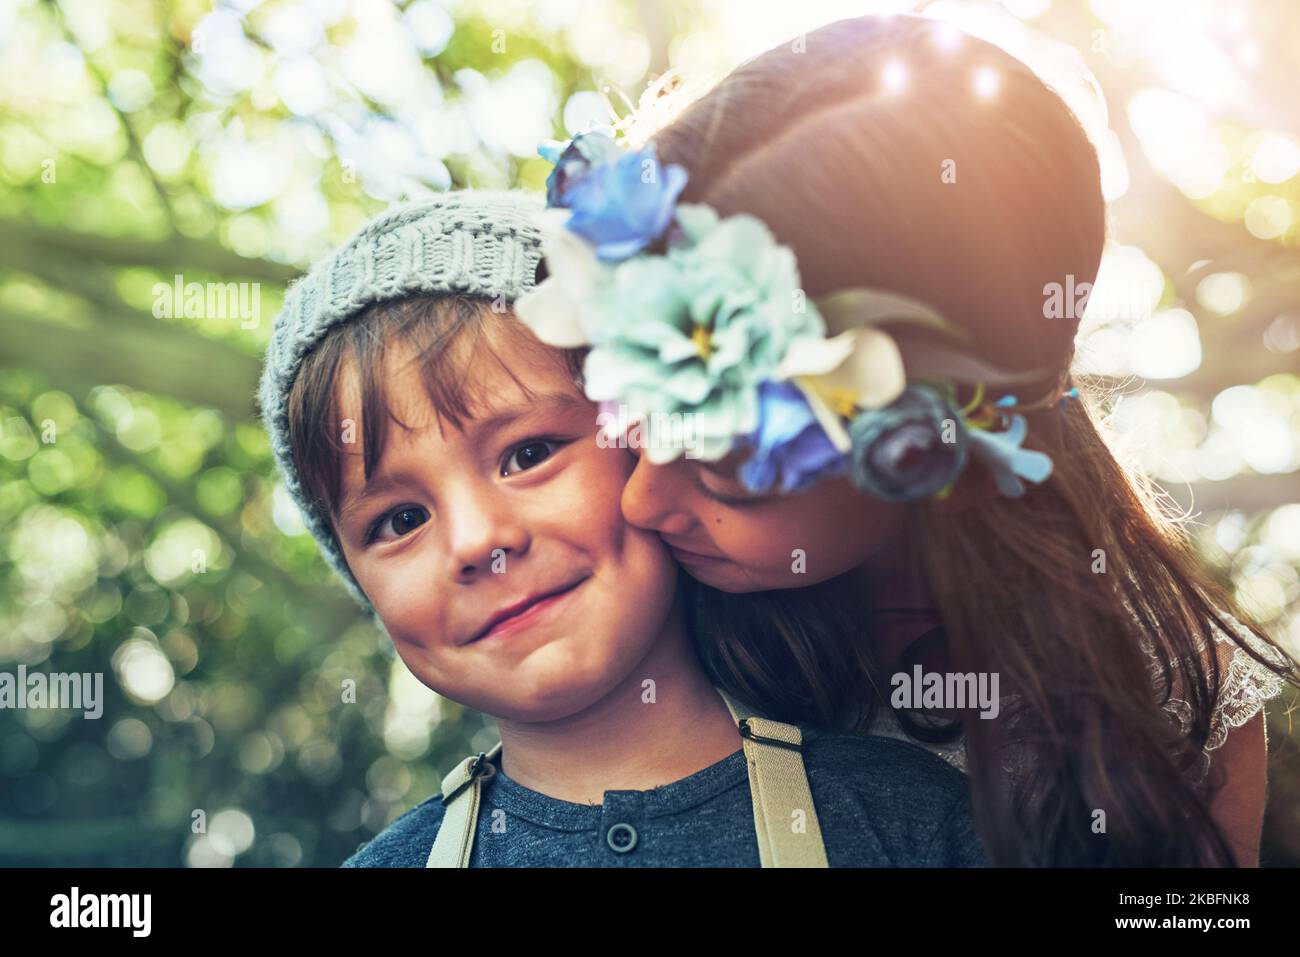 Set your imagination free. two little siblings bonding together outdoors. Stock Photo